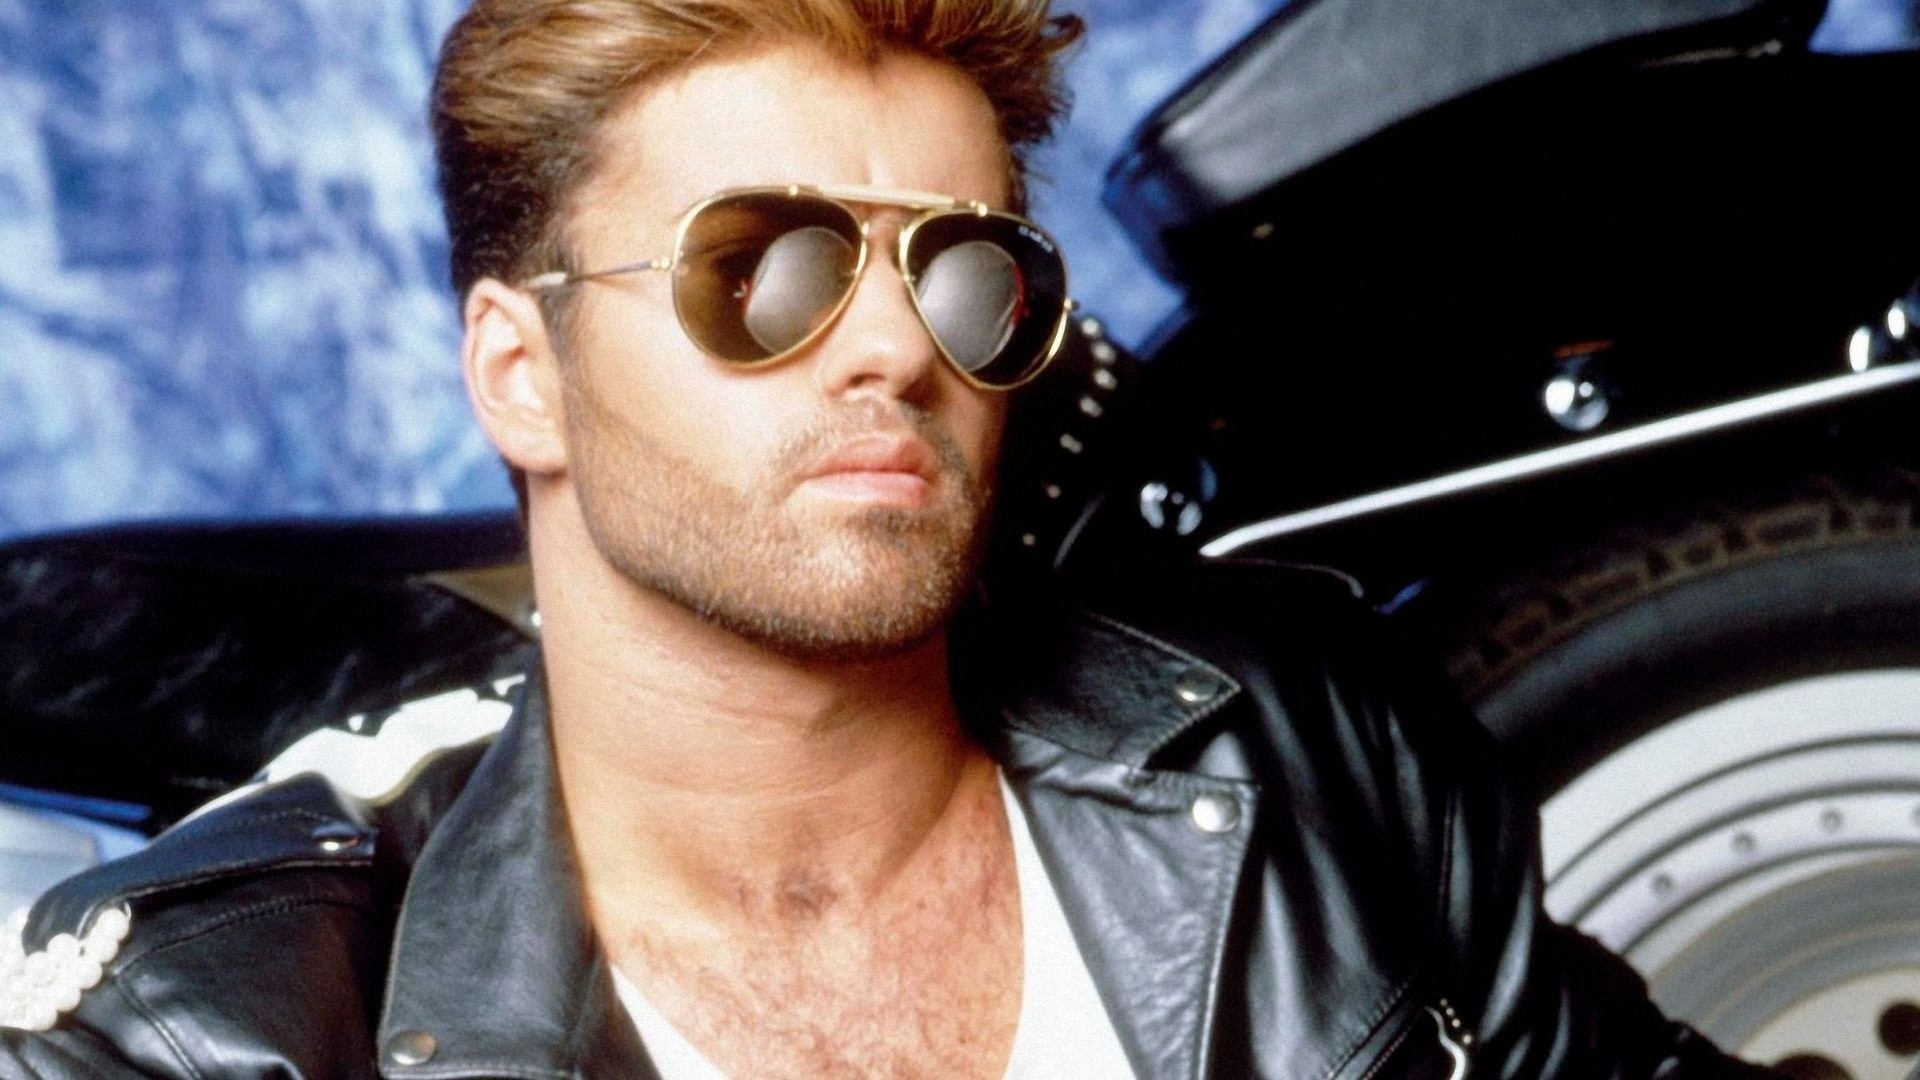 1920x1080 George Michael Wallpapers George Michael widescreen wallpapers